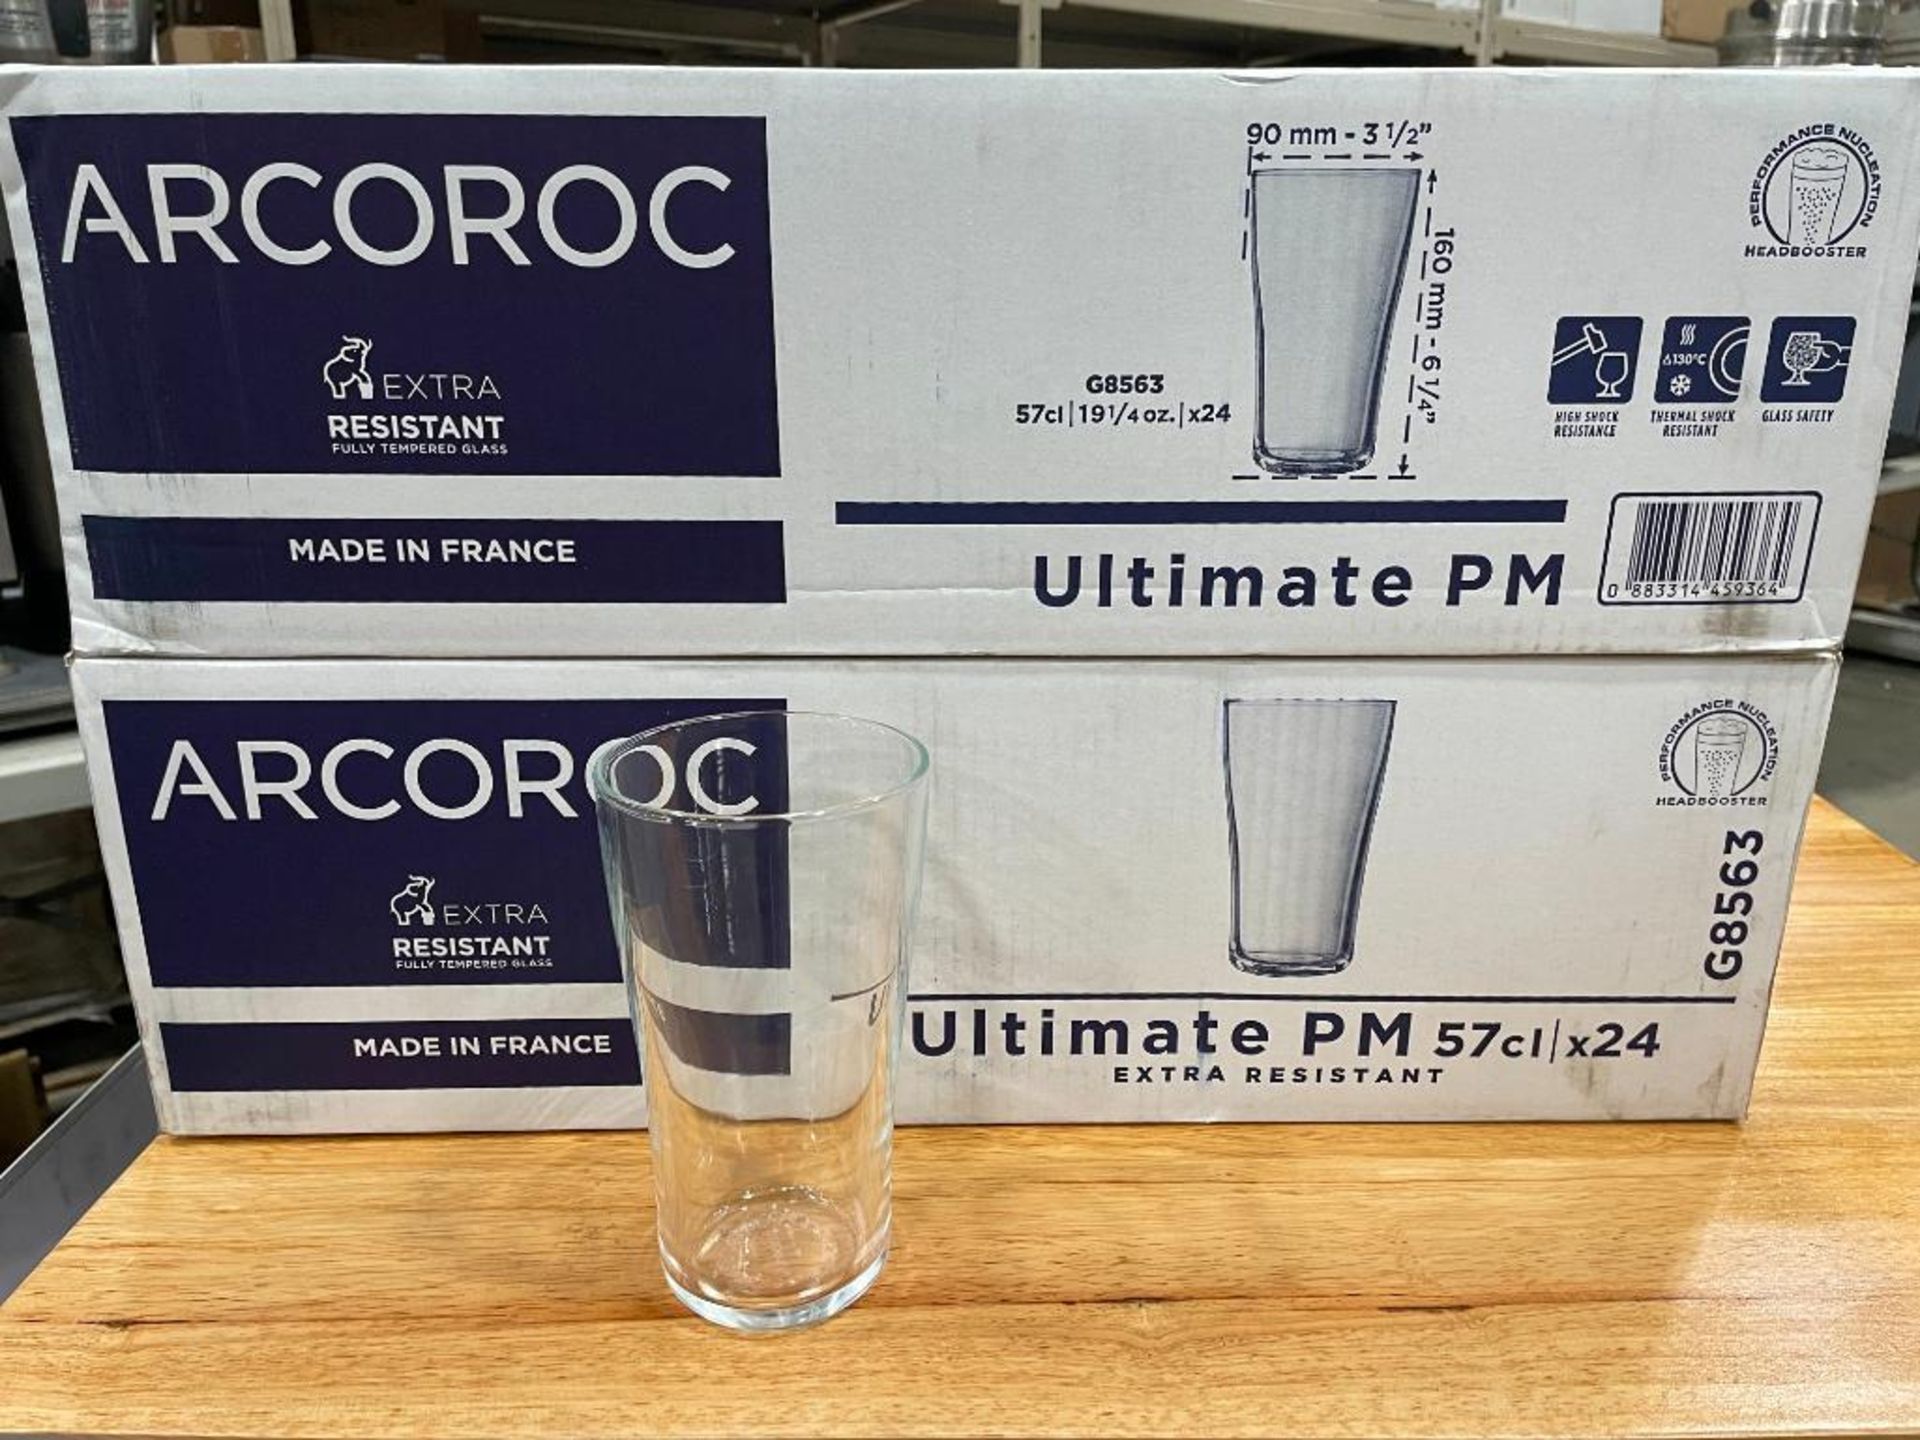 2 CASES OF ULTIMATE 20OZ PINT GLASSES, 24 PER CASE, ARCOROC G8563 - NEW